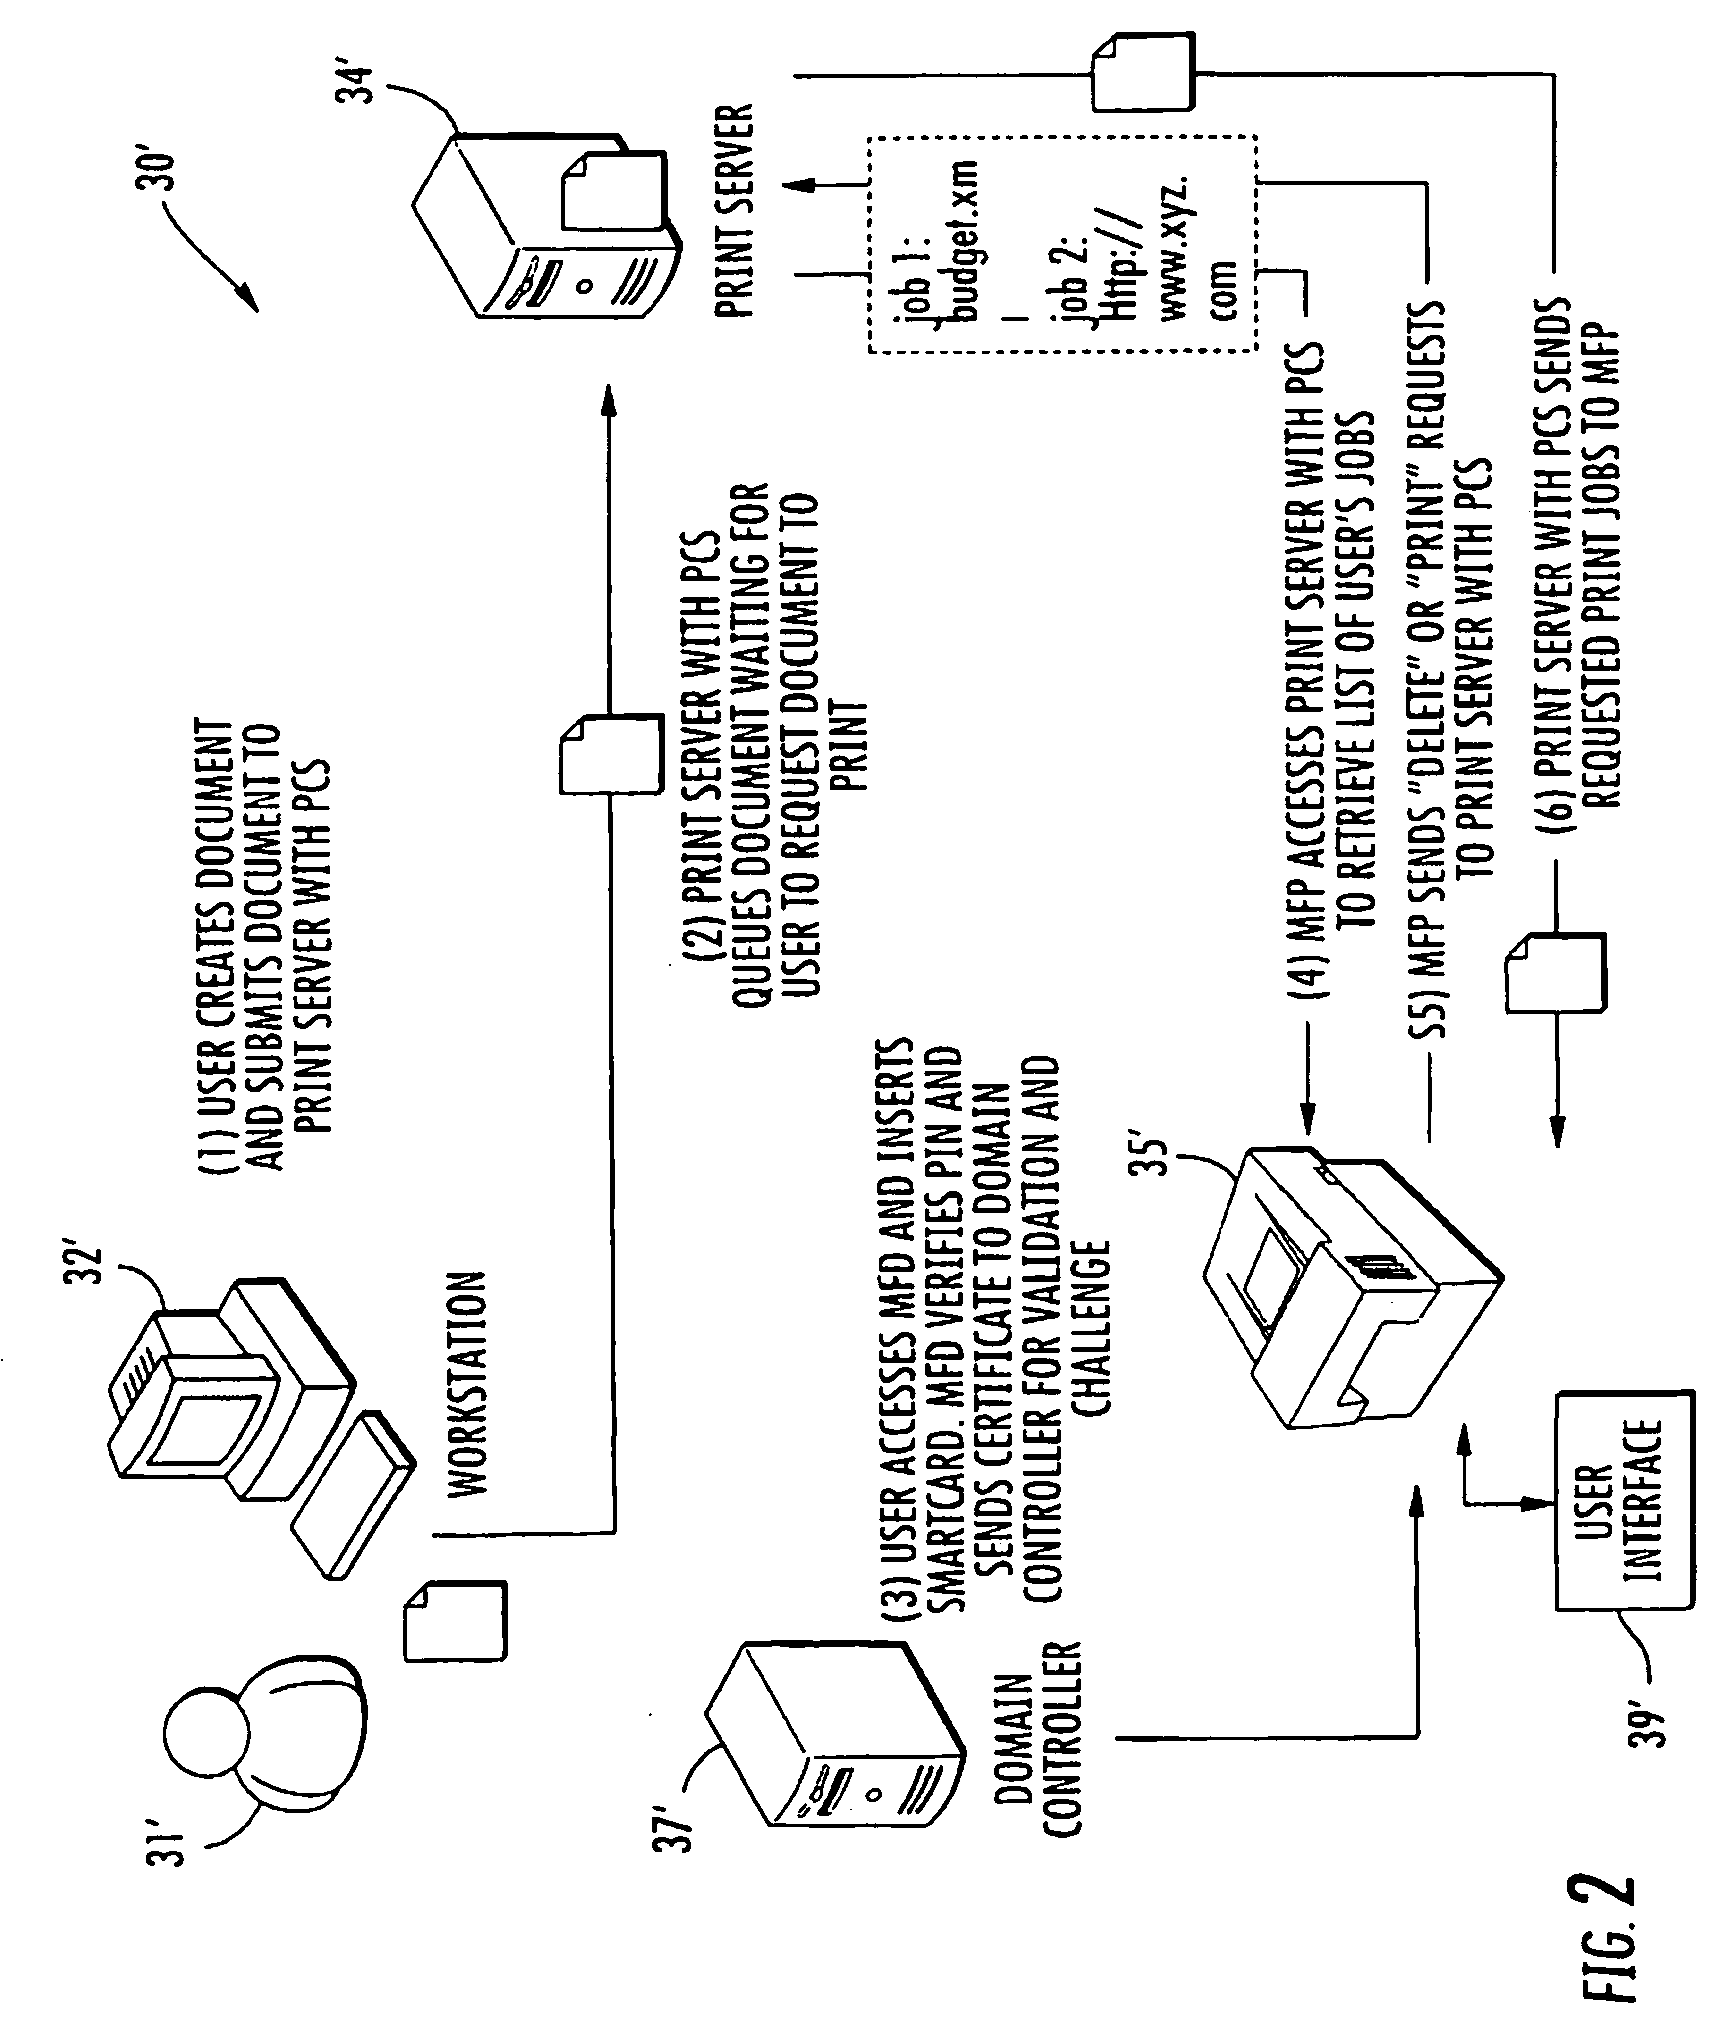 Print management system and related methods